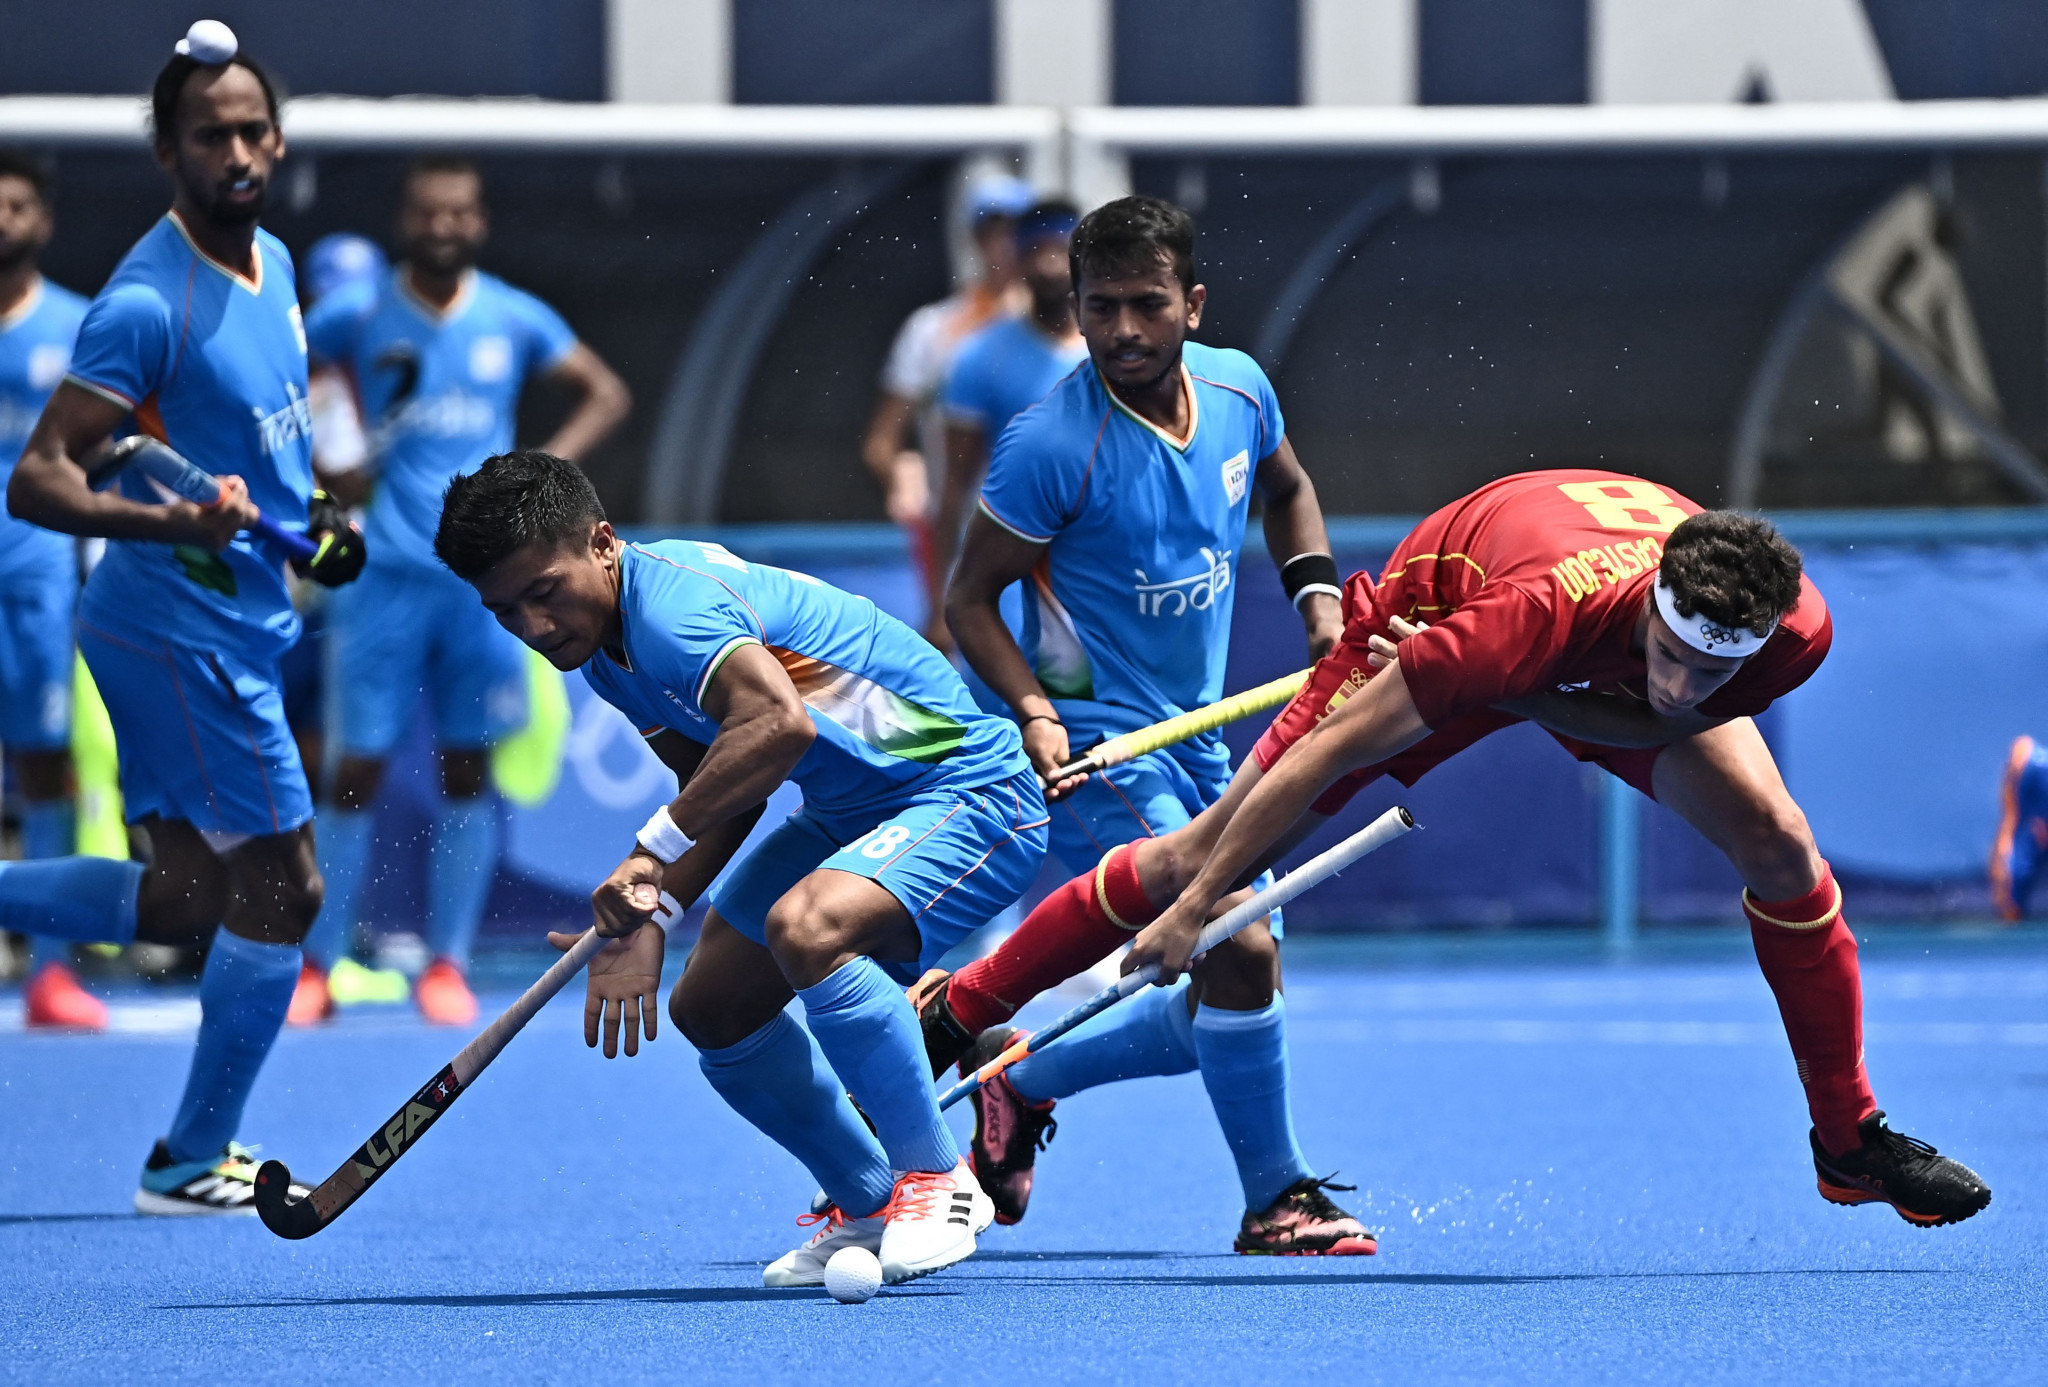 India hosting Spain in men's and women's Hockey Pro League doubleheader with chance to climb tables